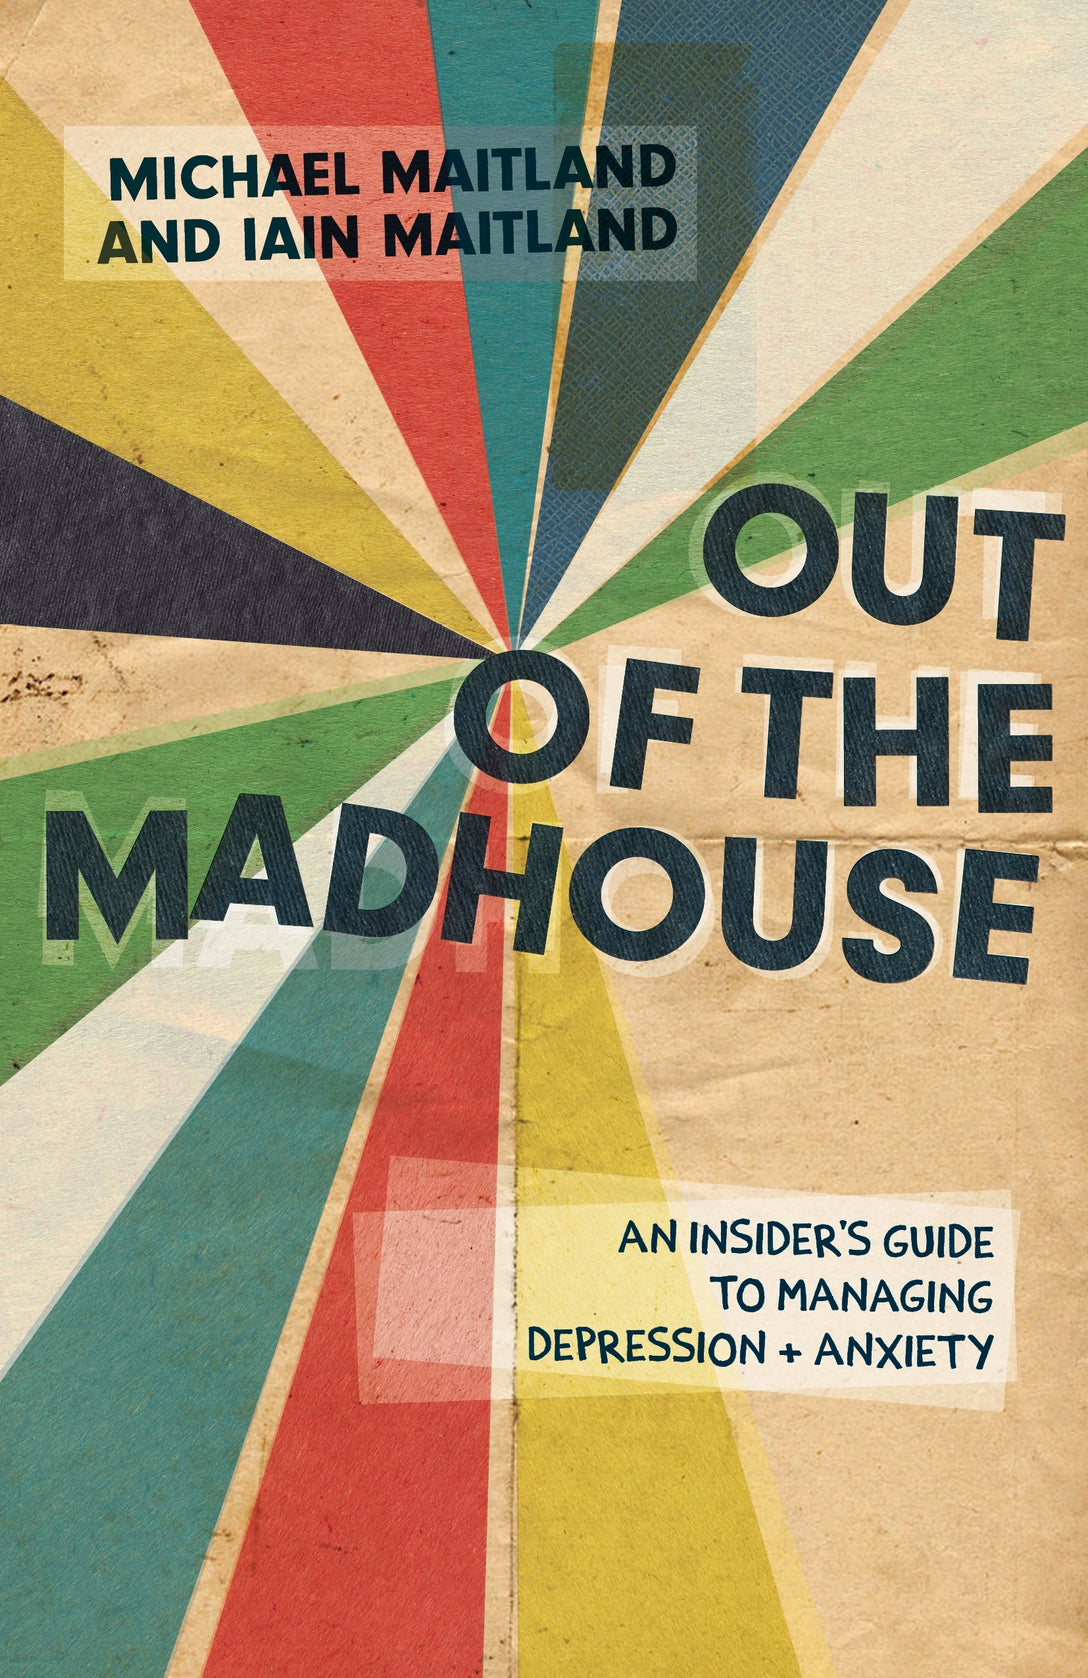 Out of the Madhouse by Iain Maitland, Michael Maitland